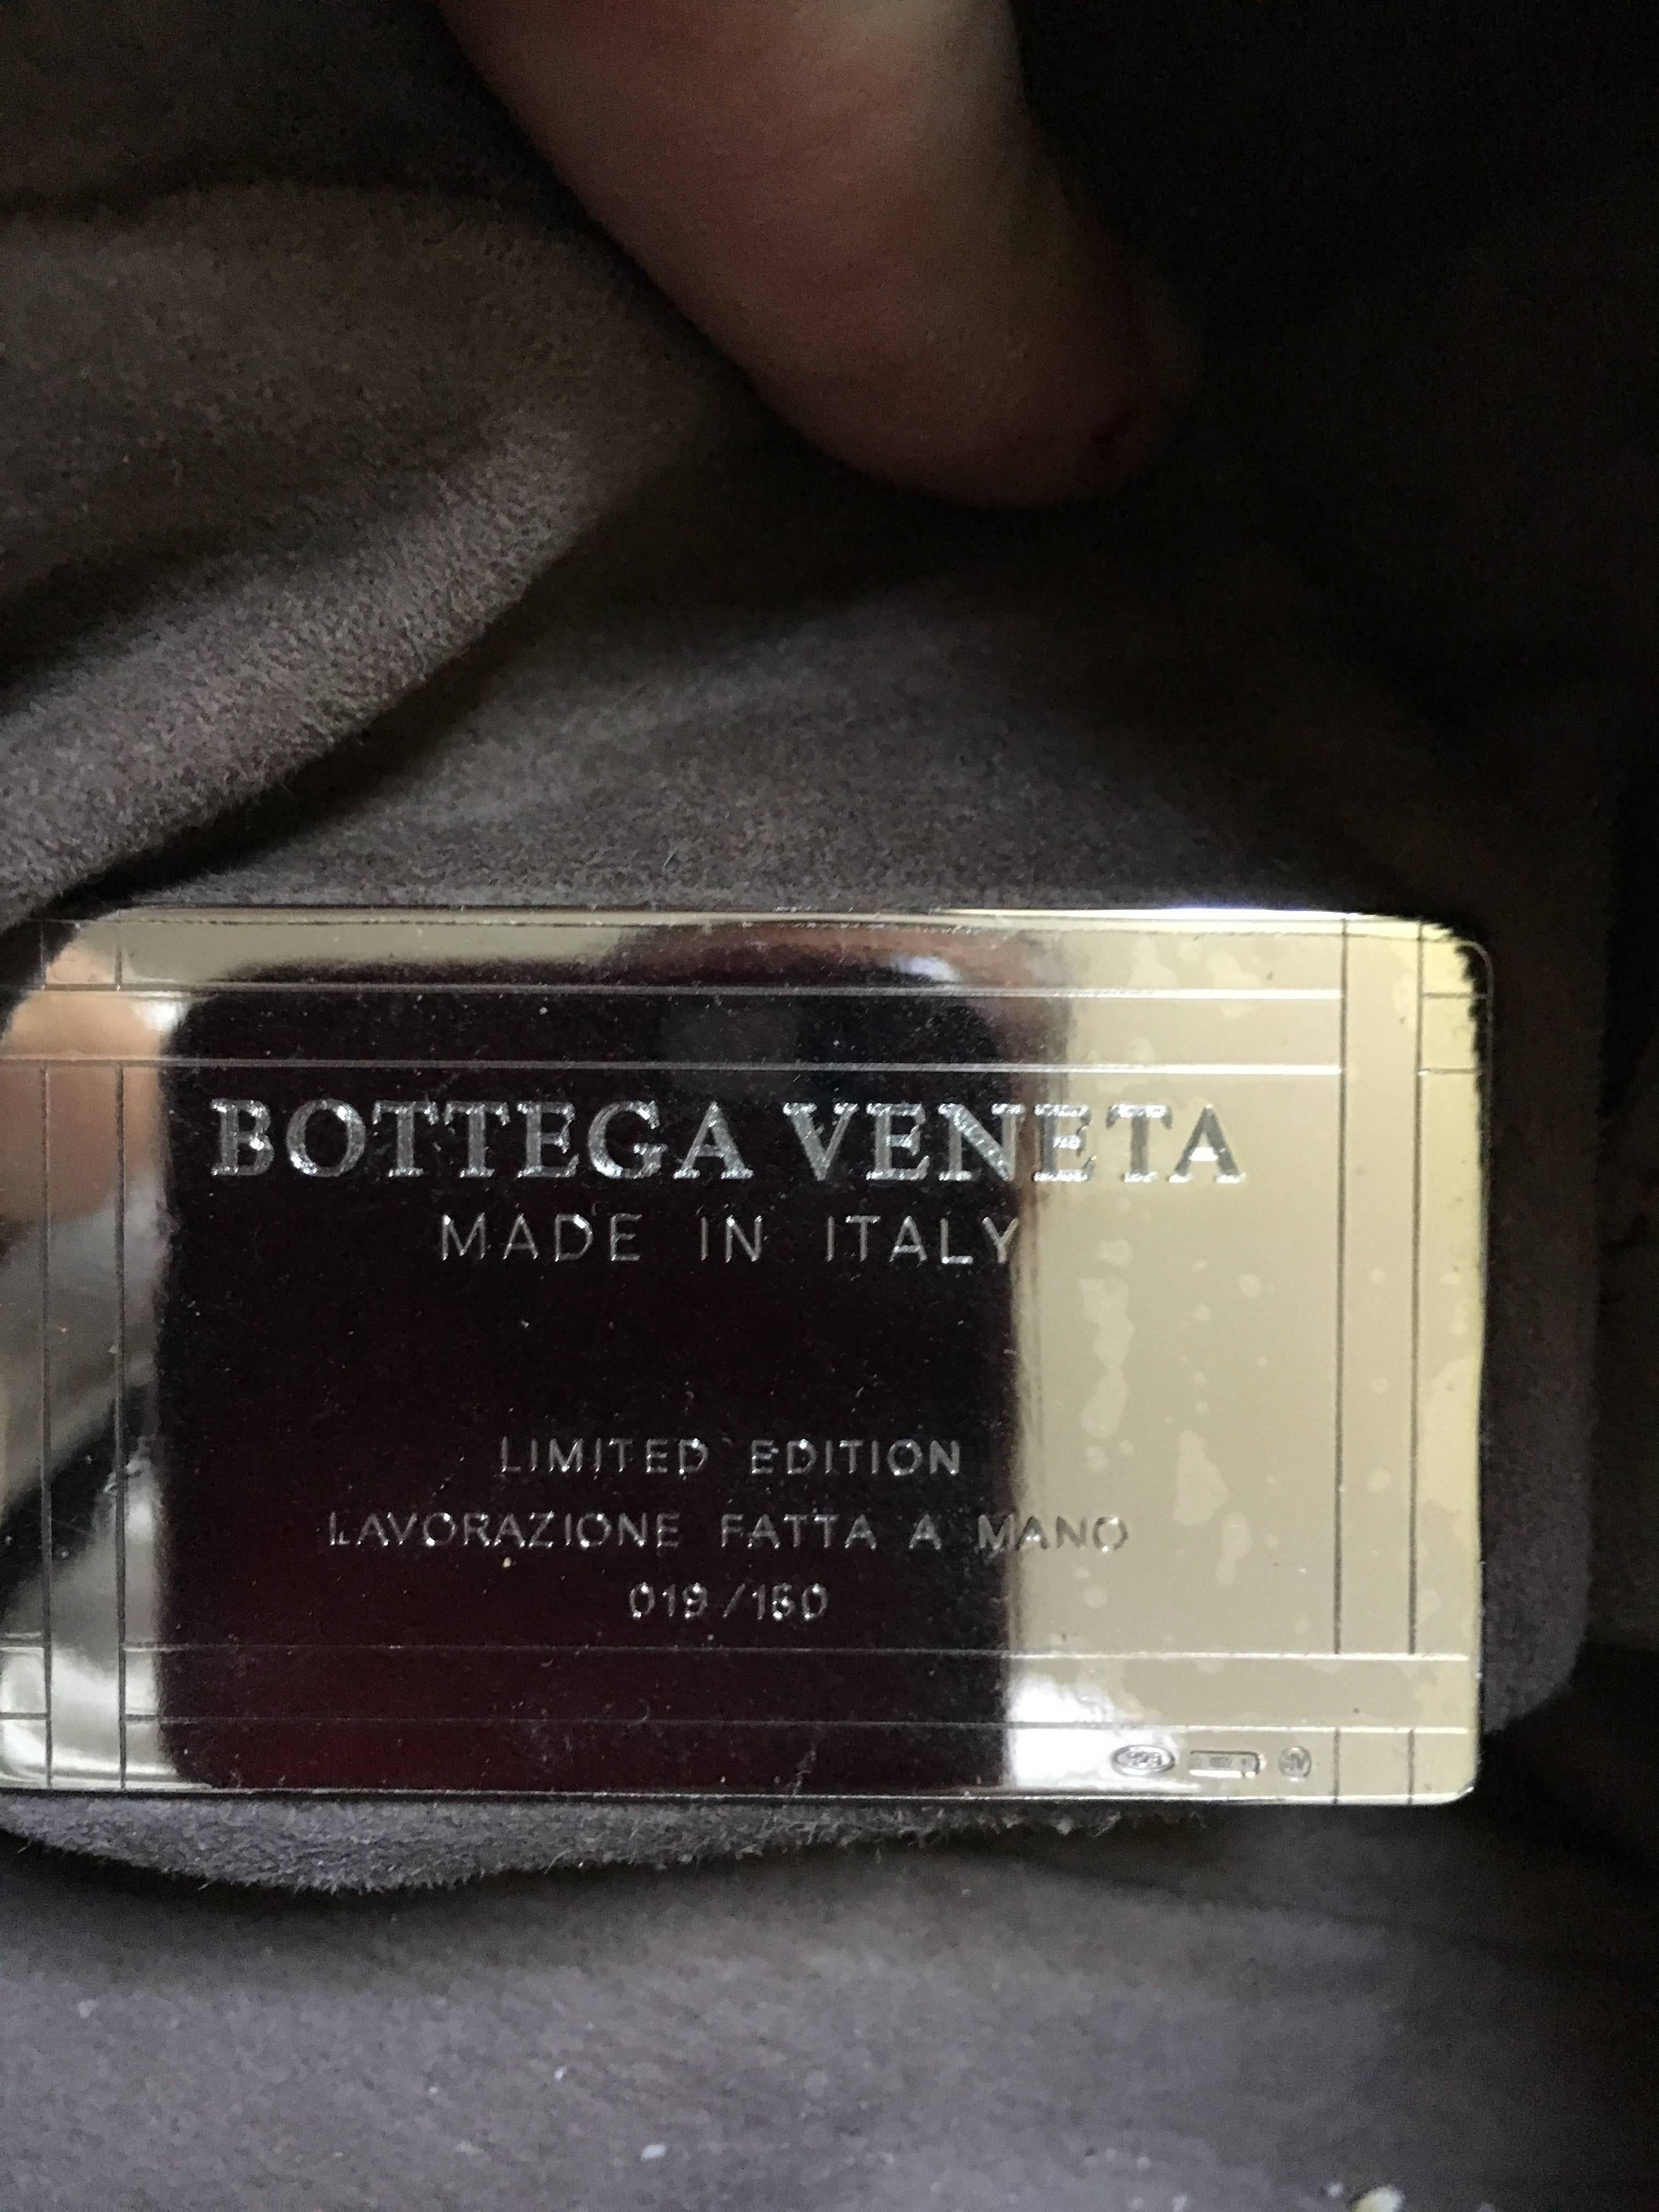 Bottega Veneta Rare Limited Edition Aubergine Woven Leather and Lizard Bag In Excellent Condition For Sale In Cloverdale, CA